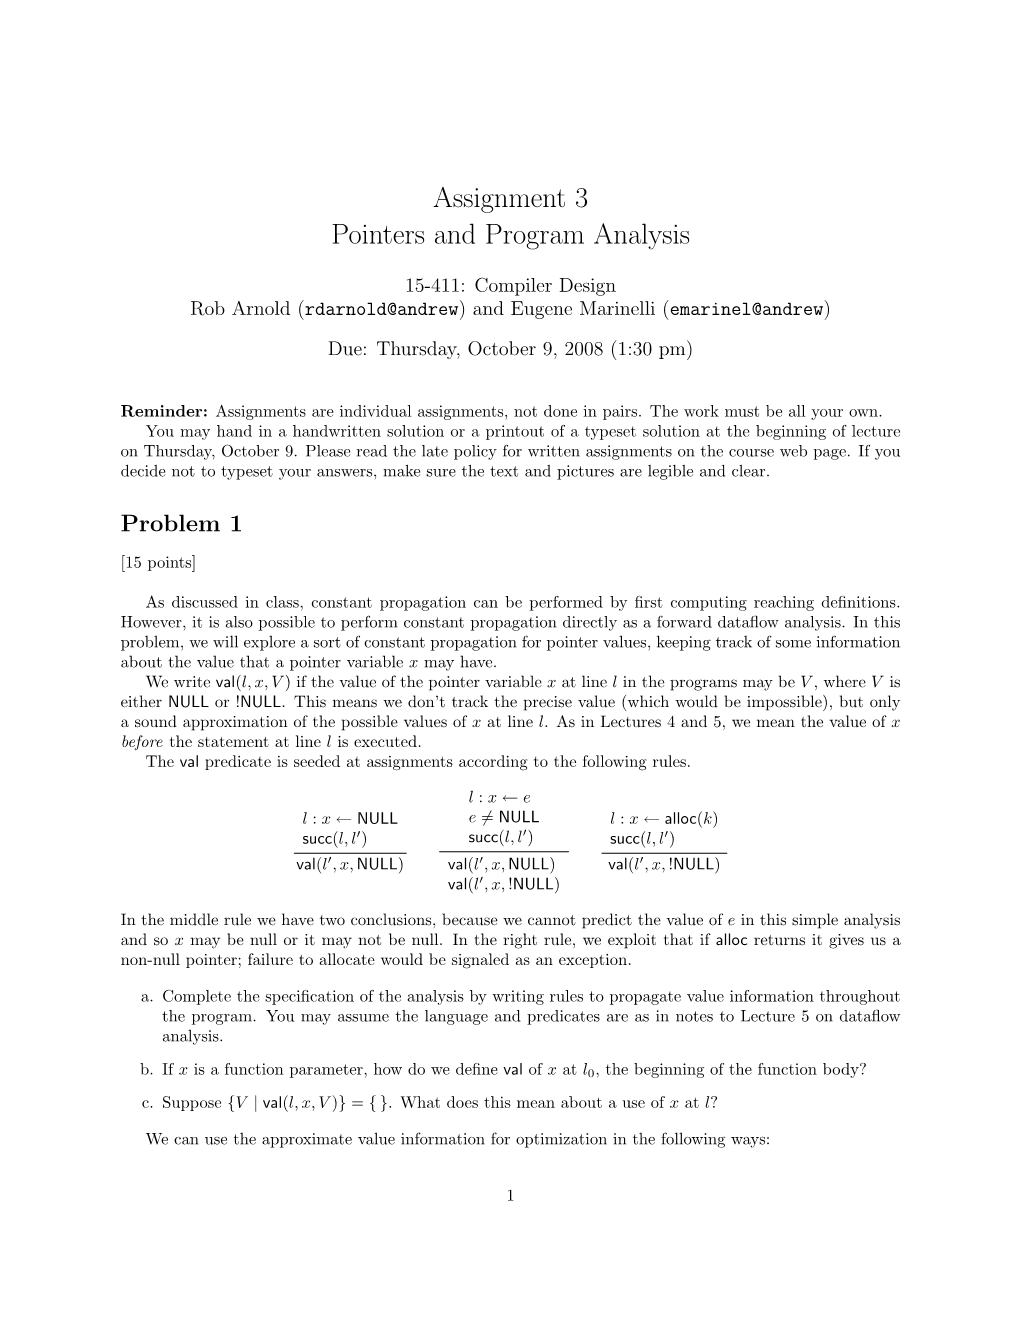 Assignment 3 Pointers and Program Analysis